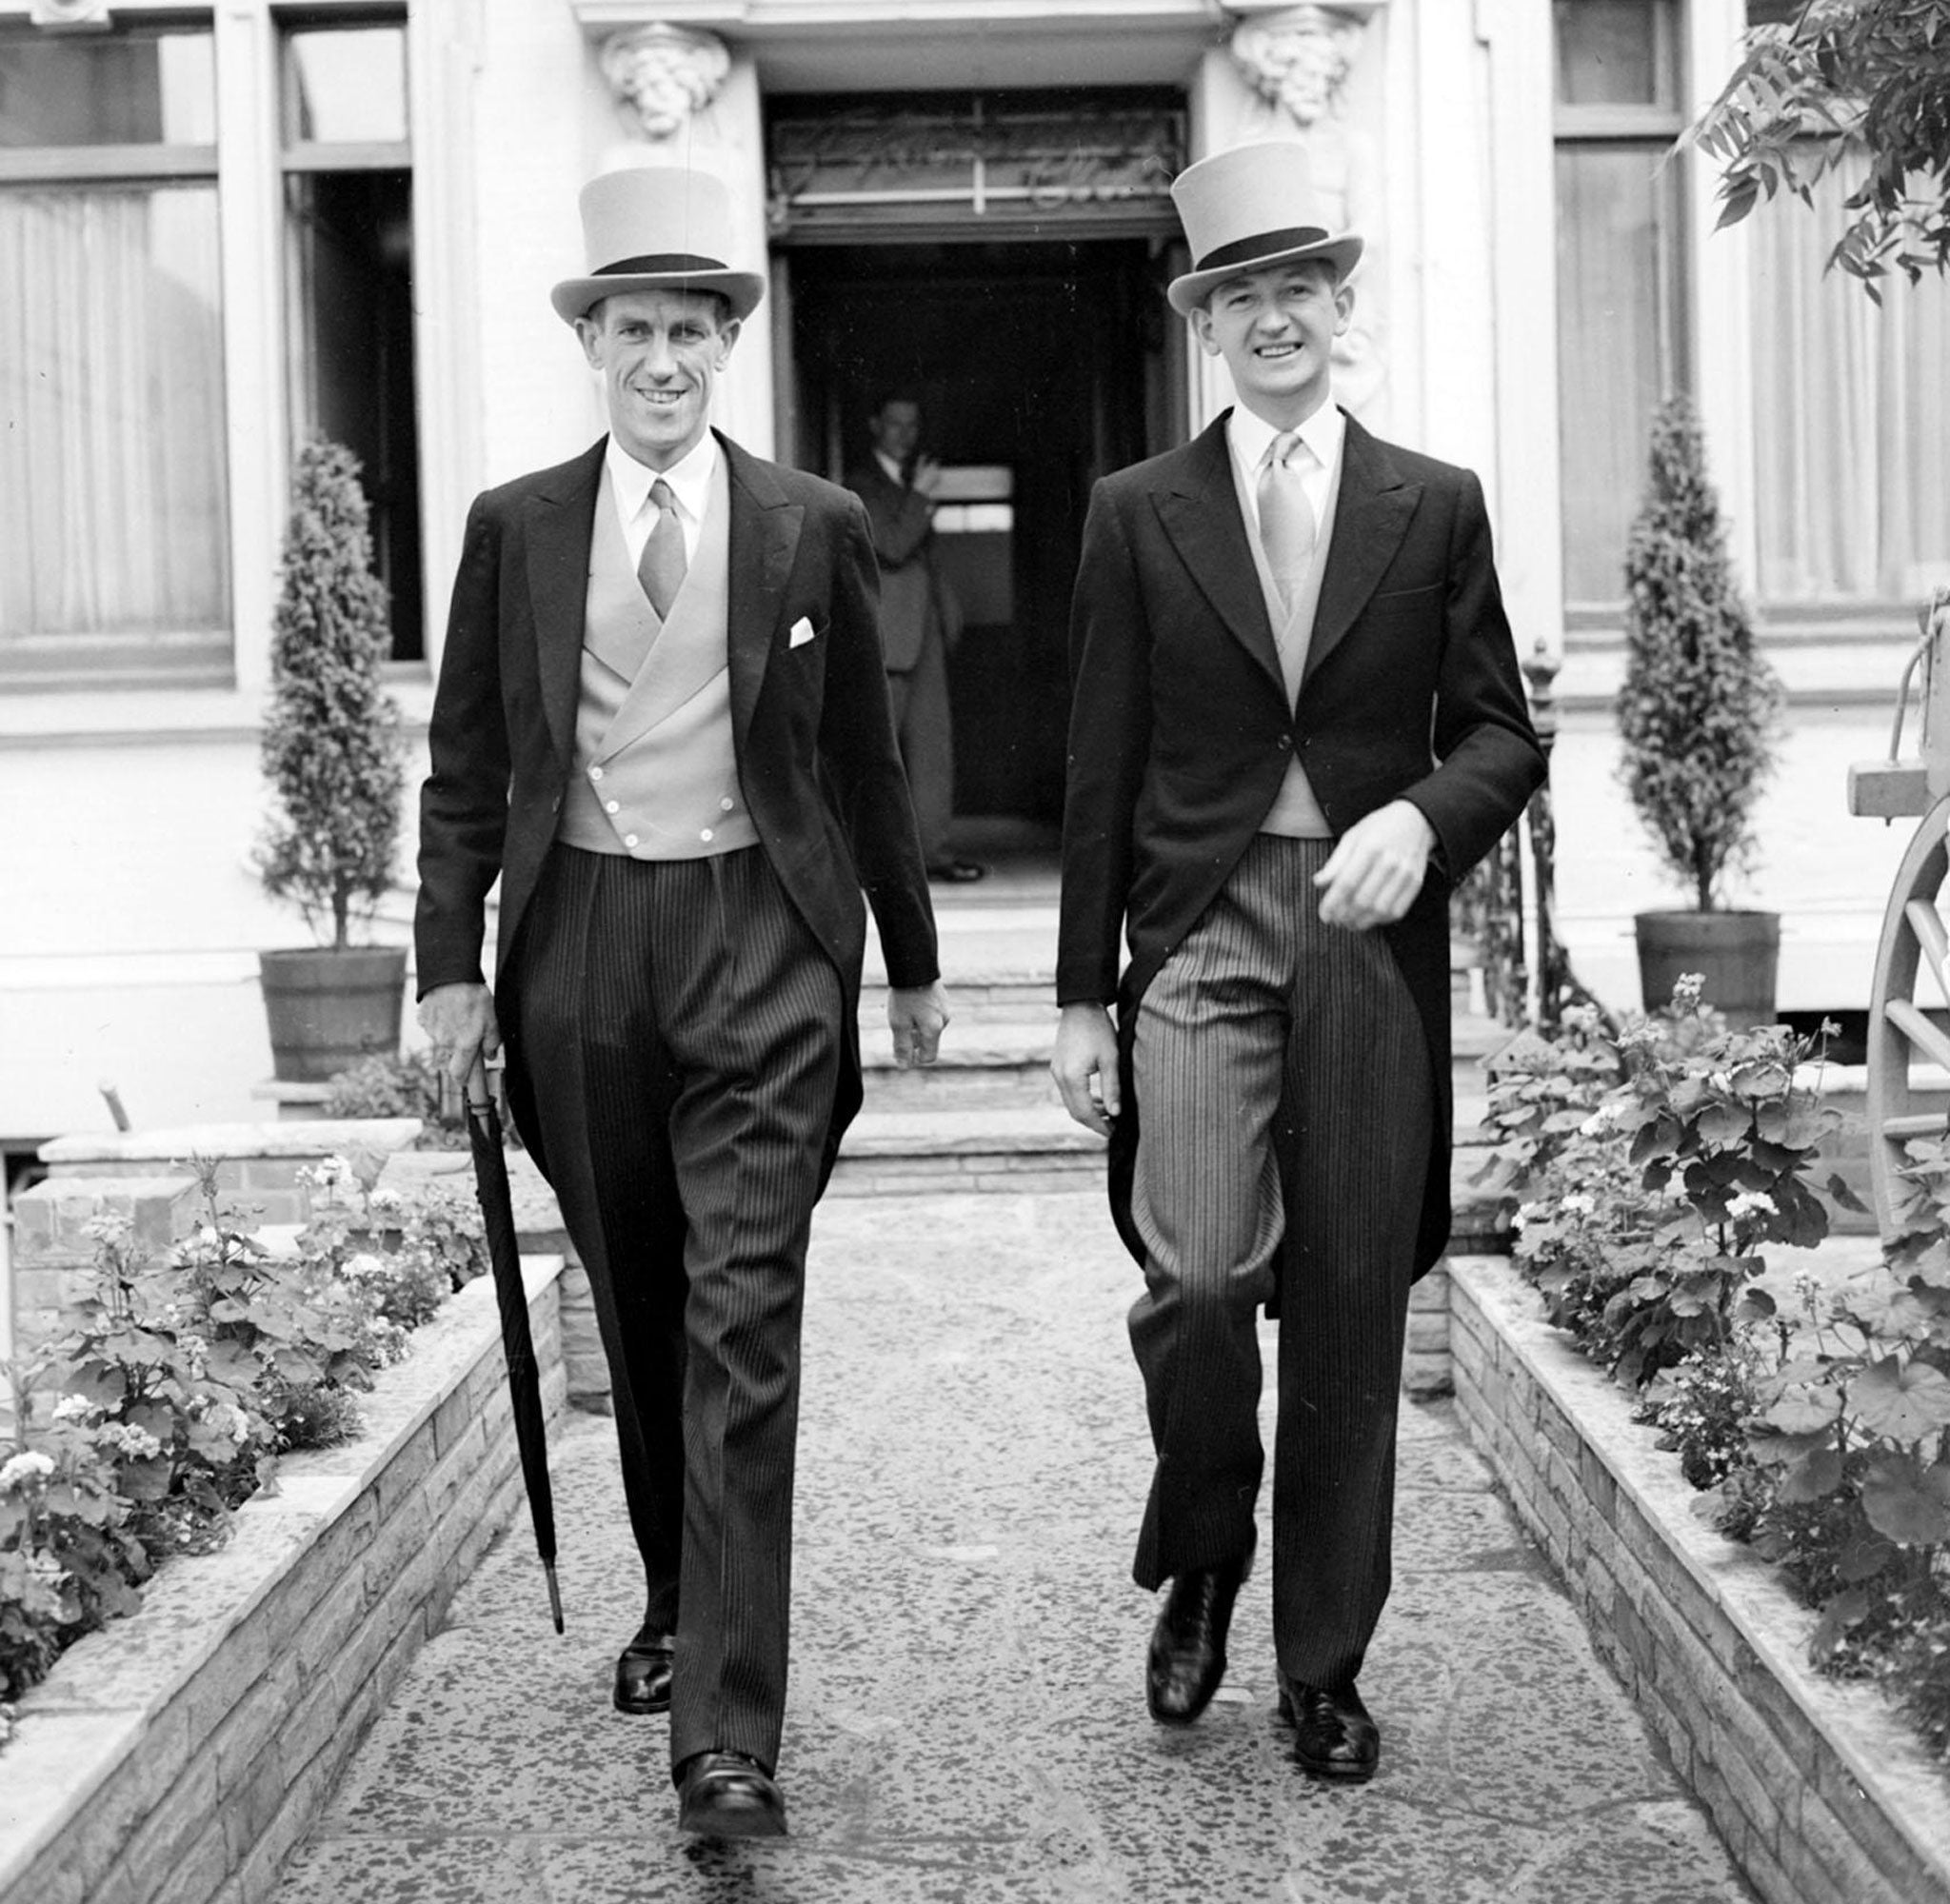 Sir Edmund Hillary (left) and fellow New Zealander George Lowe, the last surviving member of the team which first conquered Everest in 1953